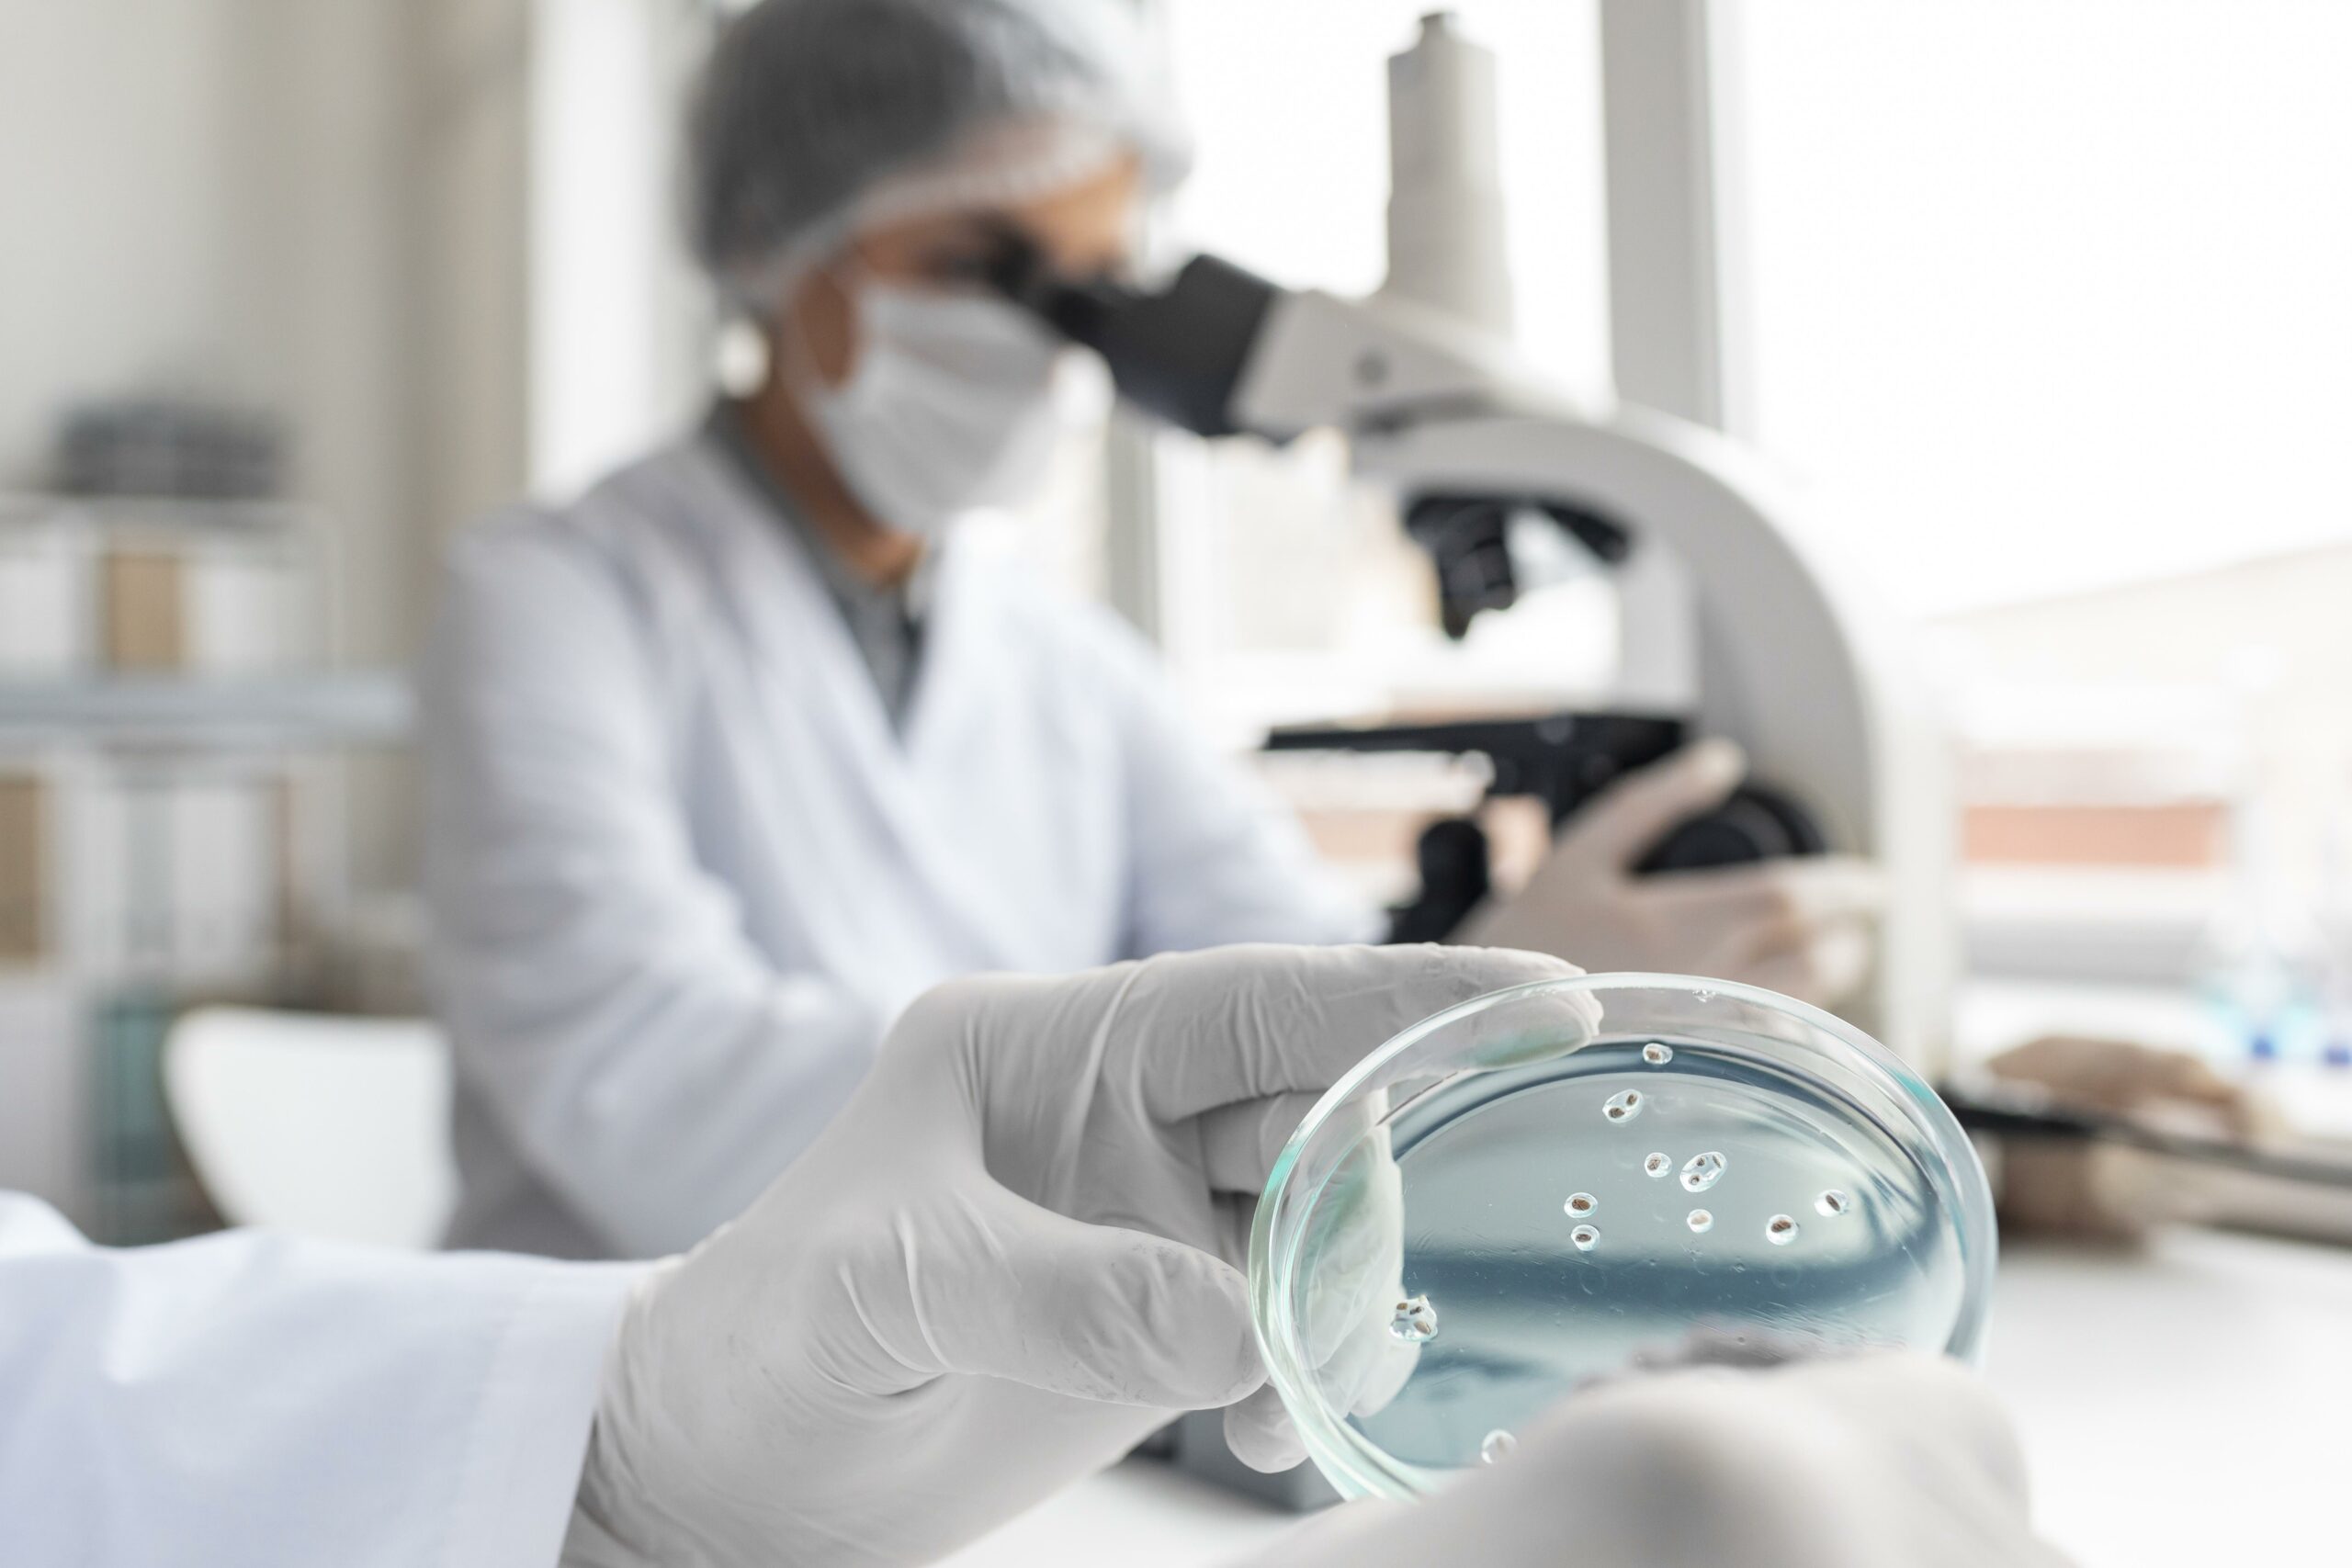 Essential Facts You Should Know About Microbial Testing